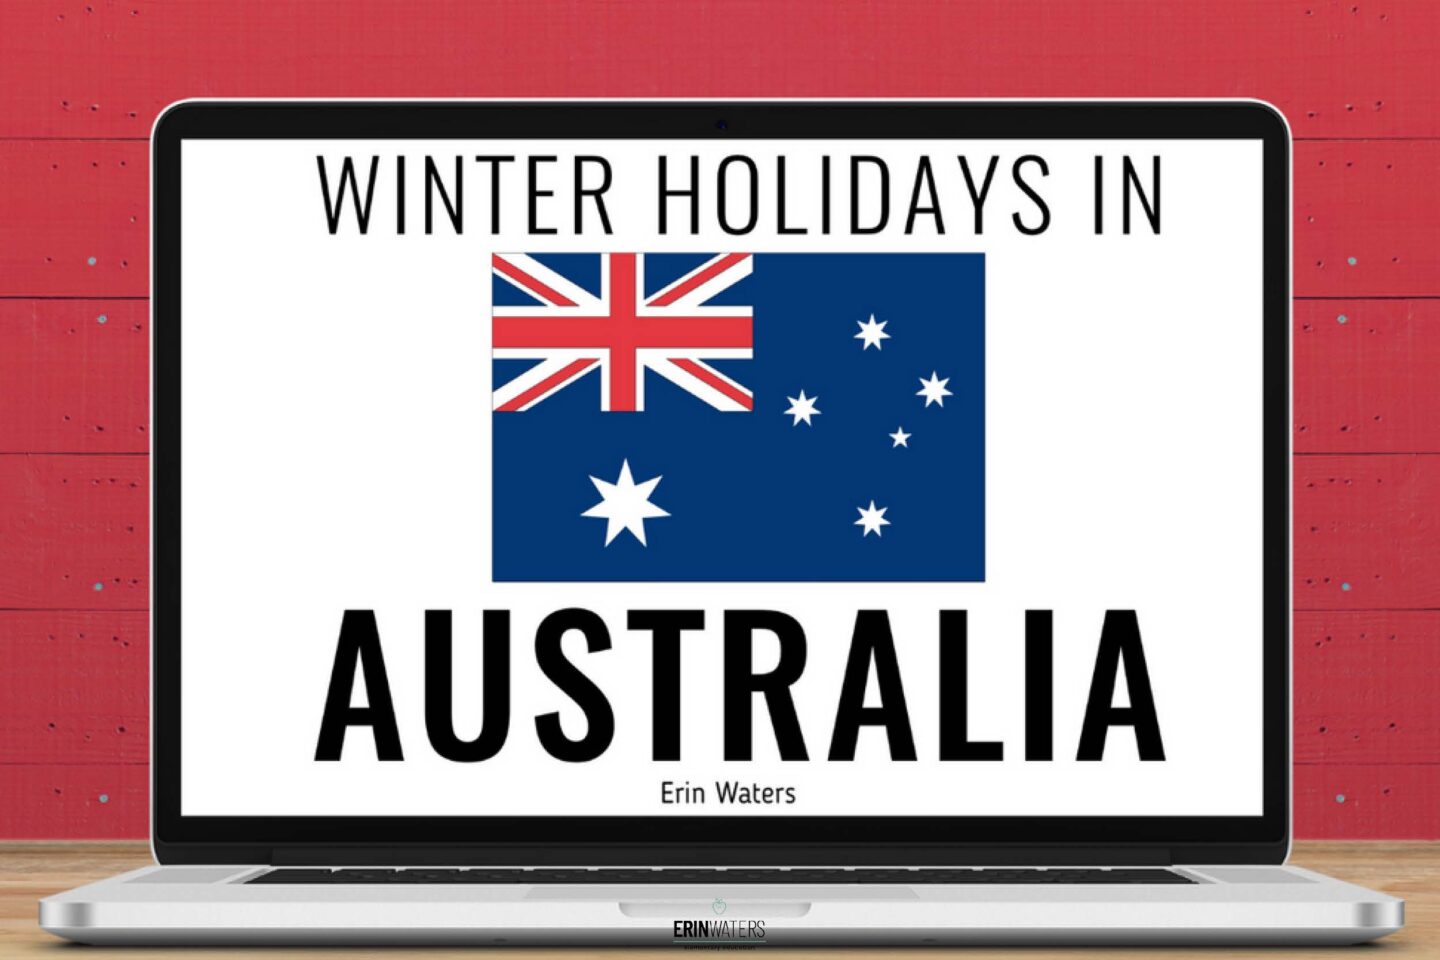 Winter Holidays in Australia slideshow intro slide; used to teach holiday traditions around the world